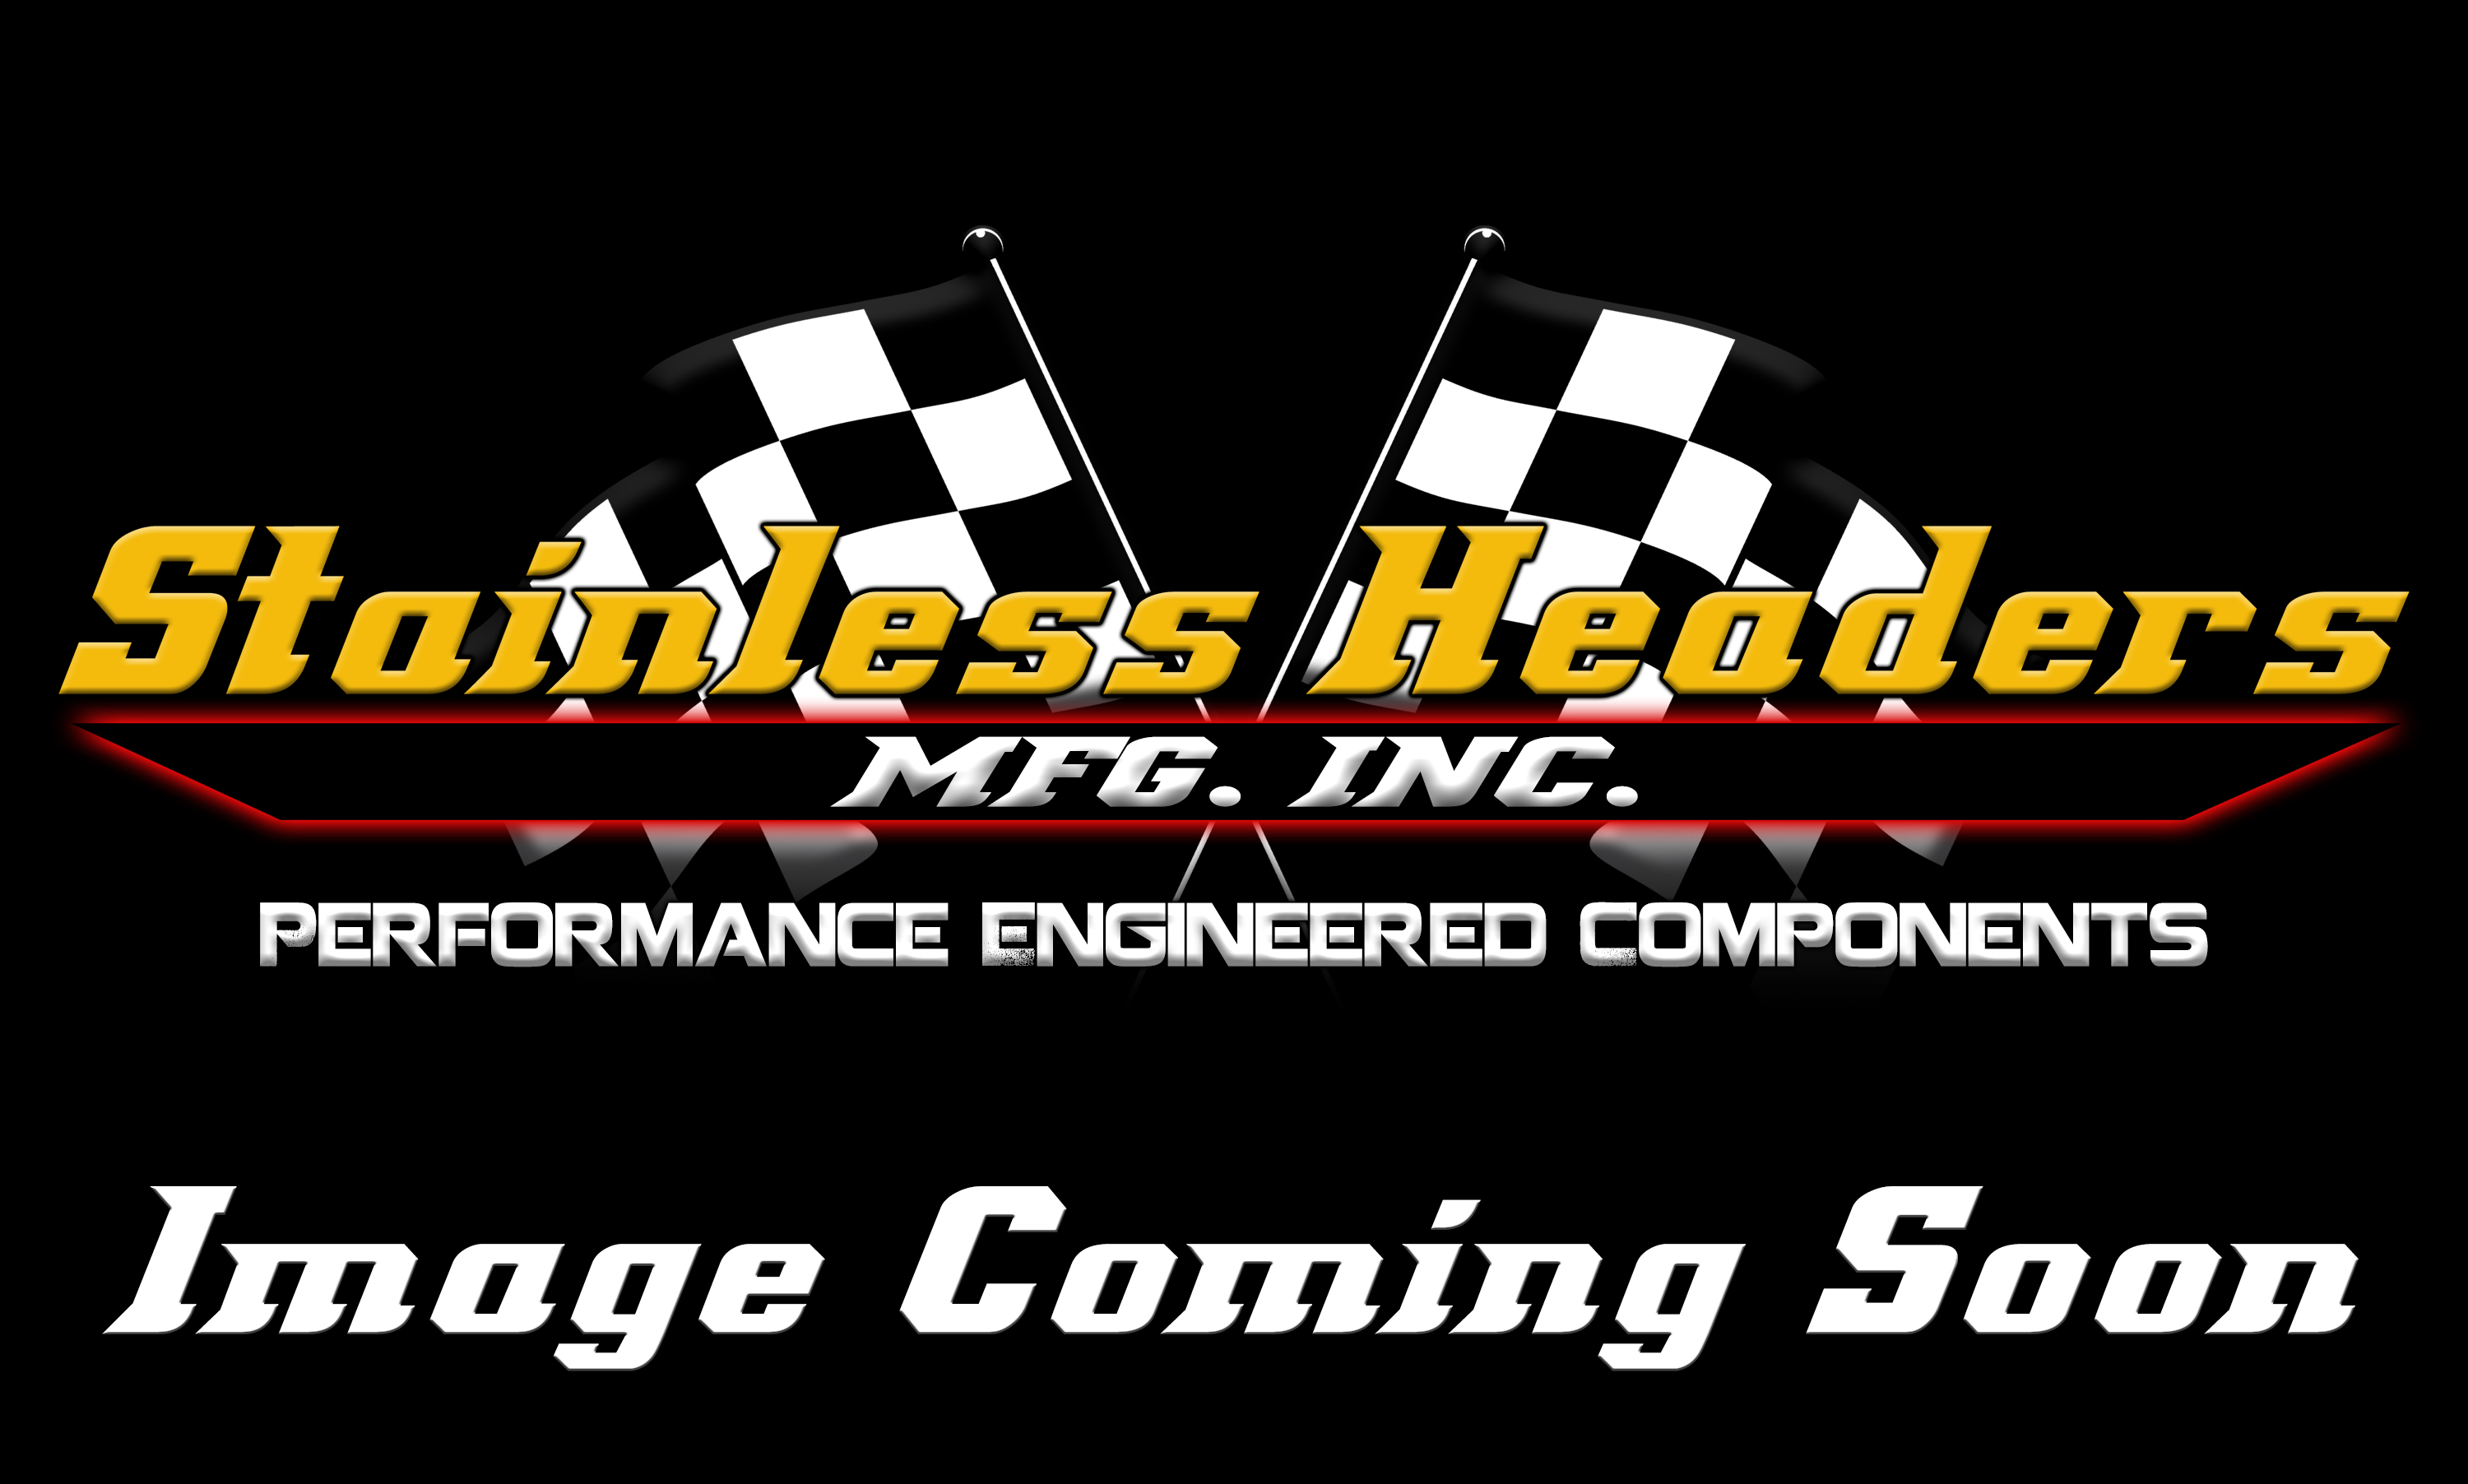 CompTurbo Technology Turbochargers - Comp Turbo Journal Bearing Turbochargers - CompTurbo Technologies - CTR4108H-8080 Reverse Rotation 360 Journal Bearing Turbocharger (1350 HP)